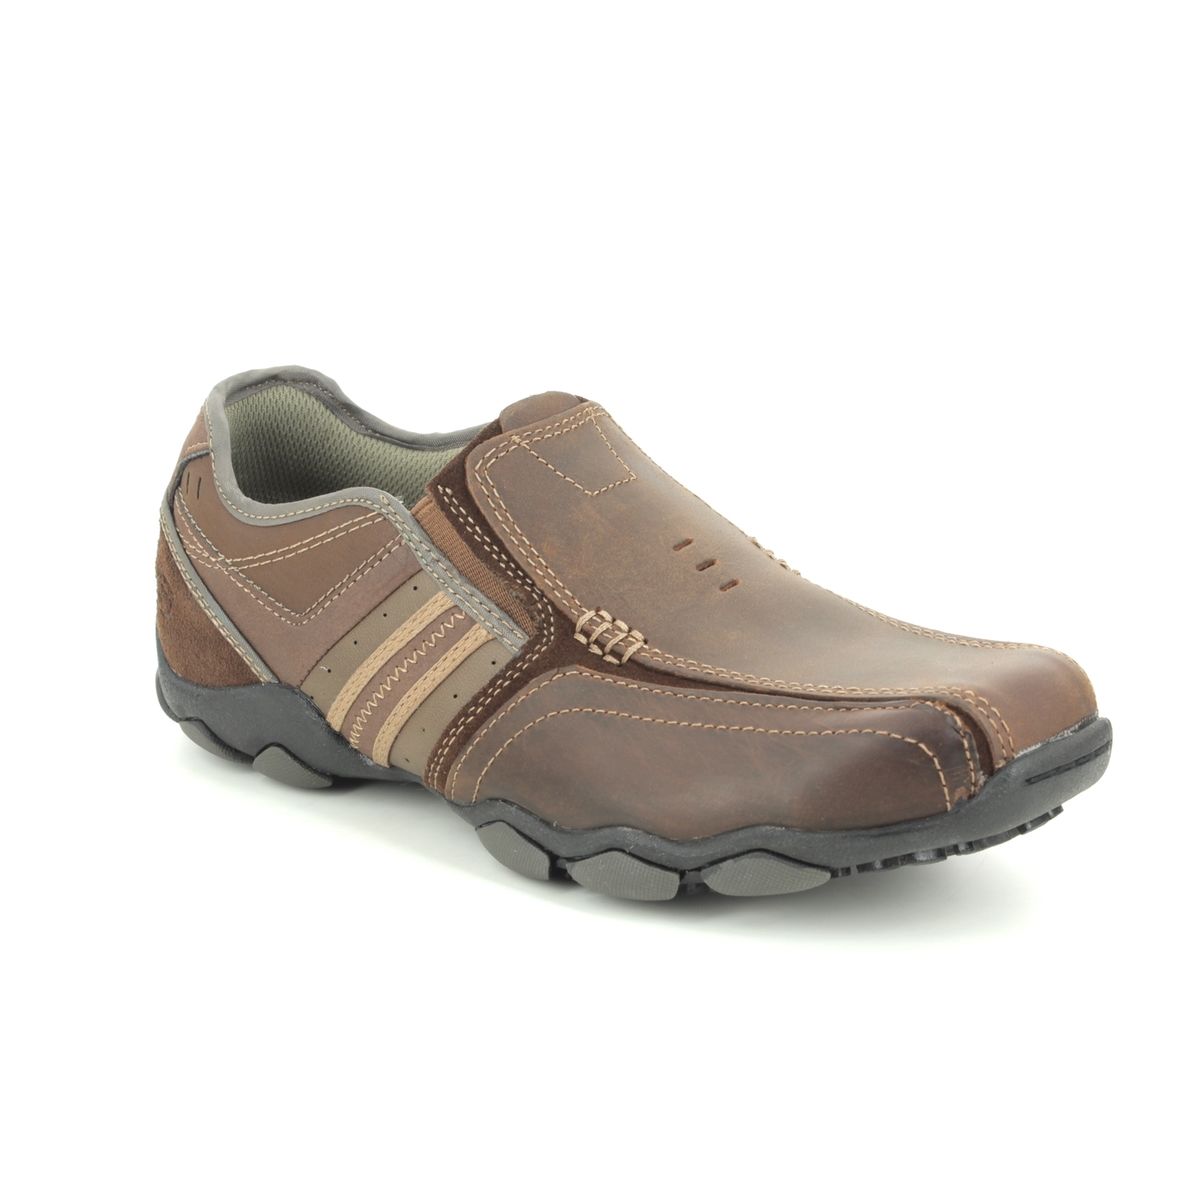 sketchers brown shoes